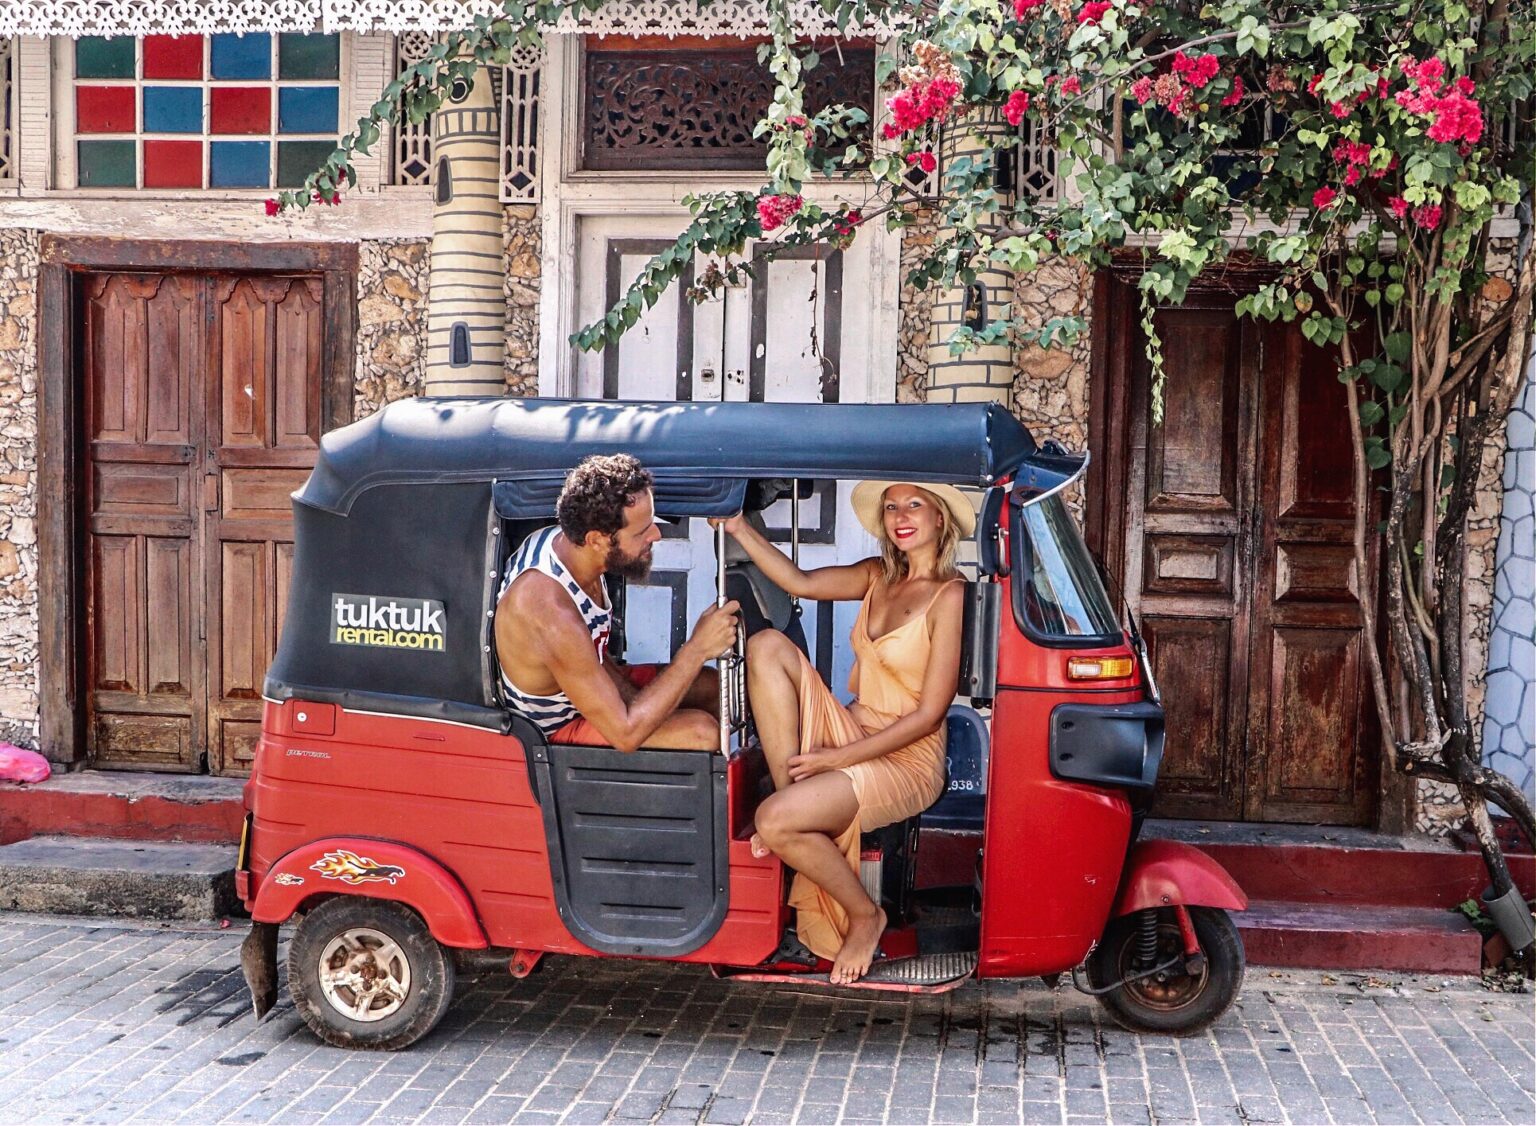 Regular tuktuk and a couple in Galle